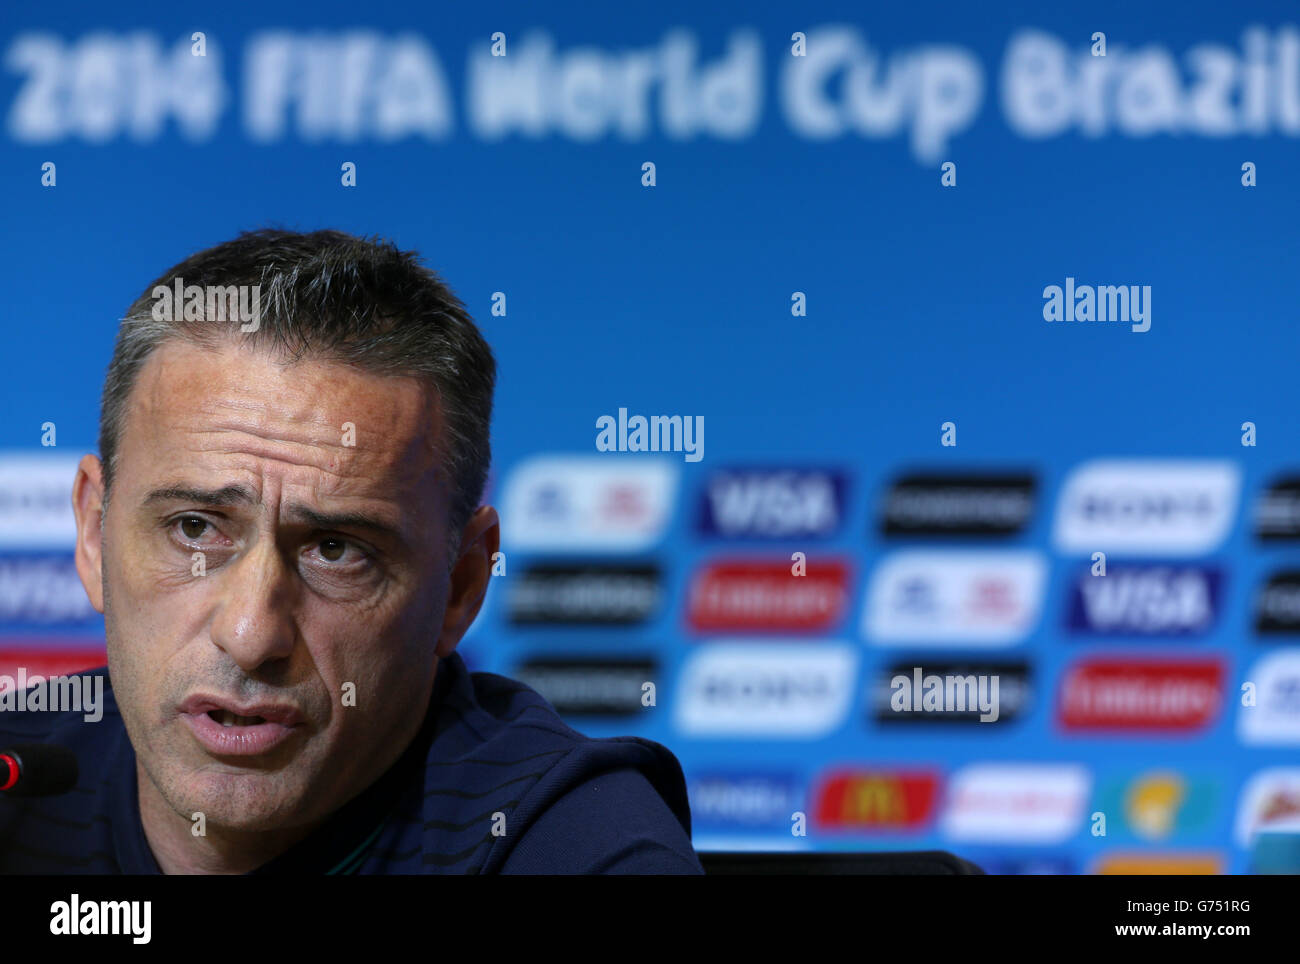 Soccer - FIFA World Cup 2014 - Group G - Germany v Portugal - Portugal Press Conference - Arena Fonte Nova. Portugal Manager Paulo Bento during press conference ahead of Germany game in Salvador Stock Photo